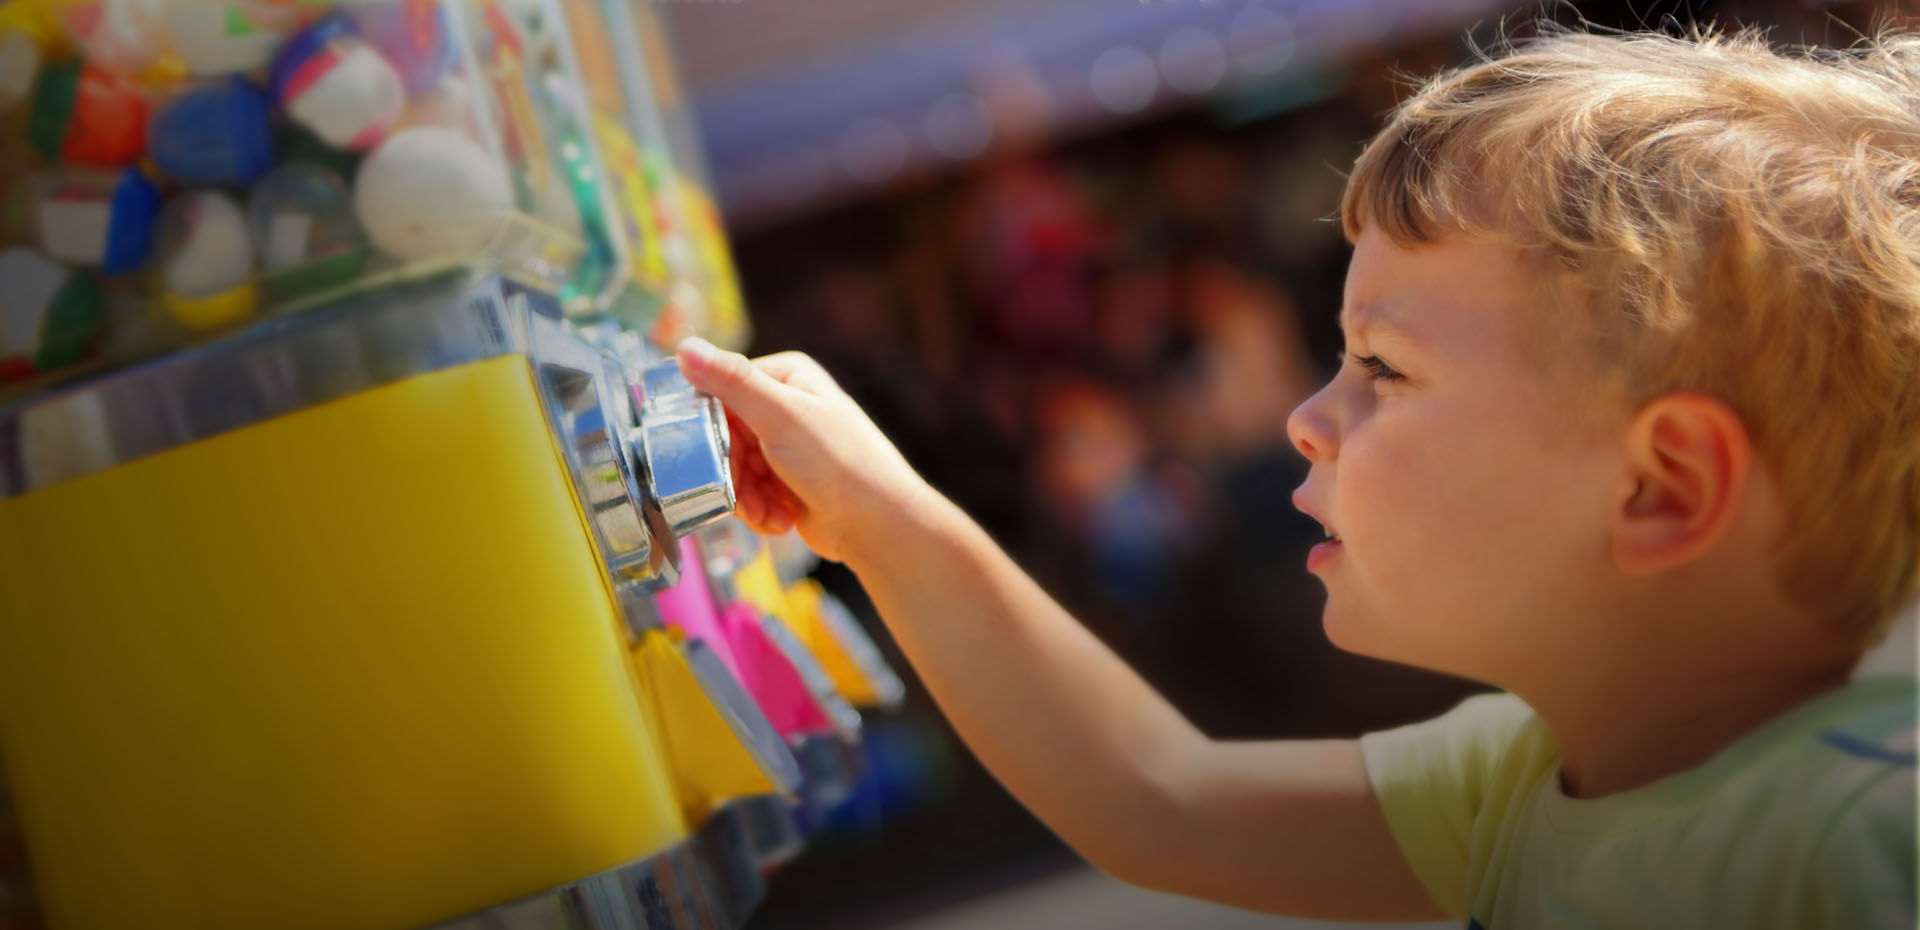 Installers Of Toys Vending Machines For Shopping Centres Corby